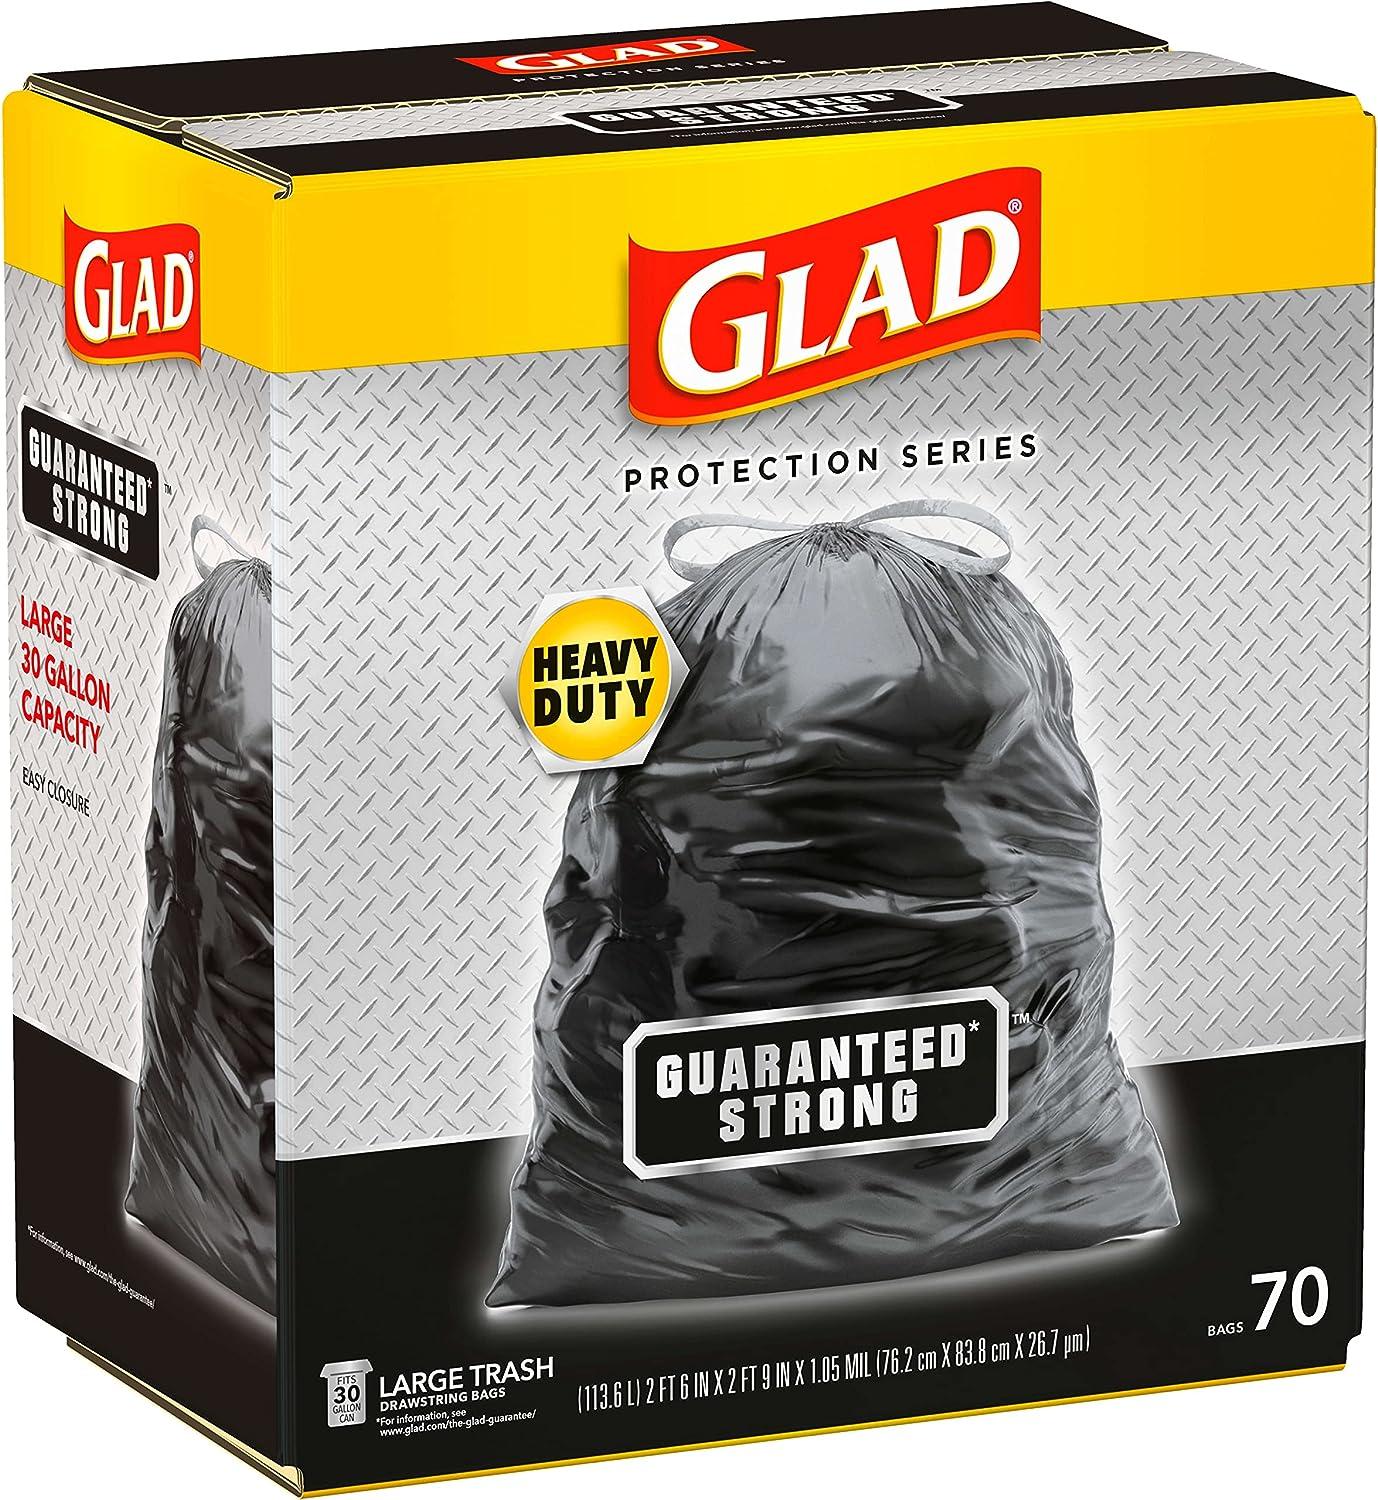 30 Gallons Plastic Trash Bags - 70 Count